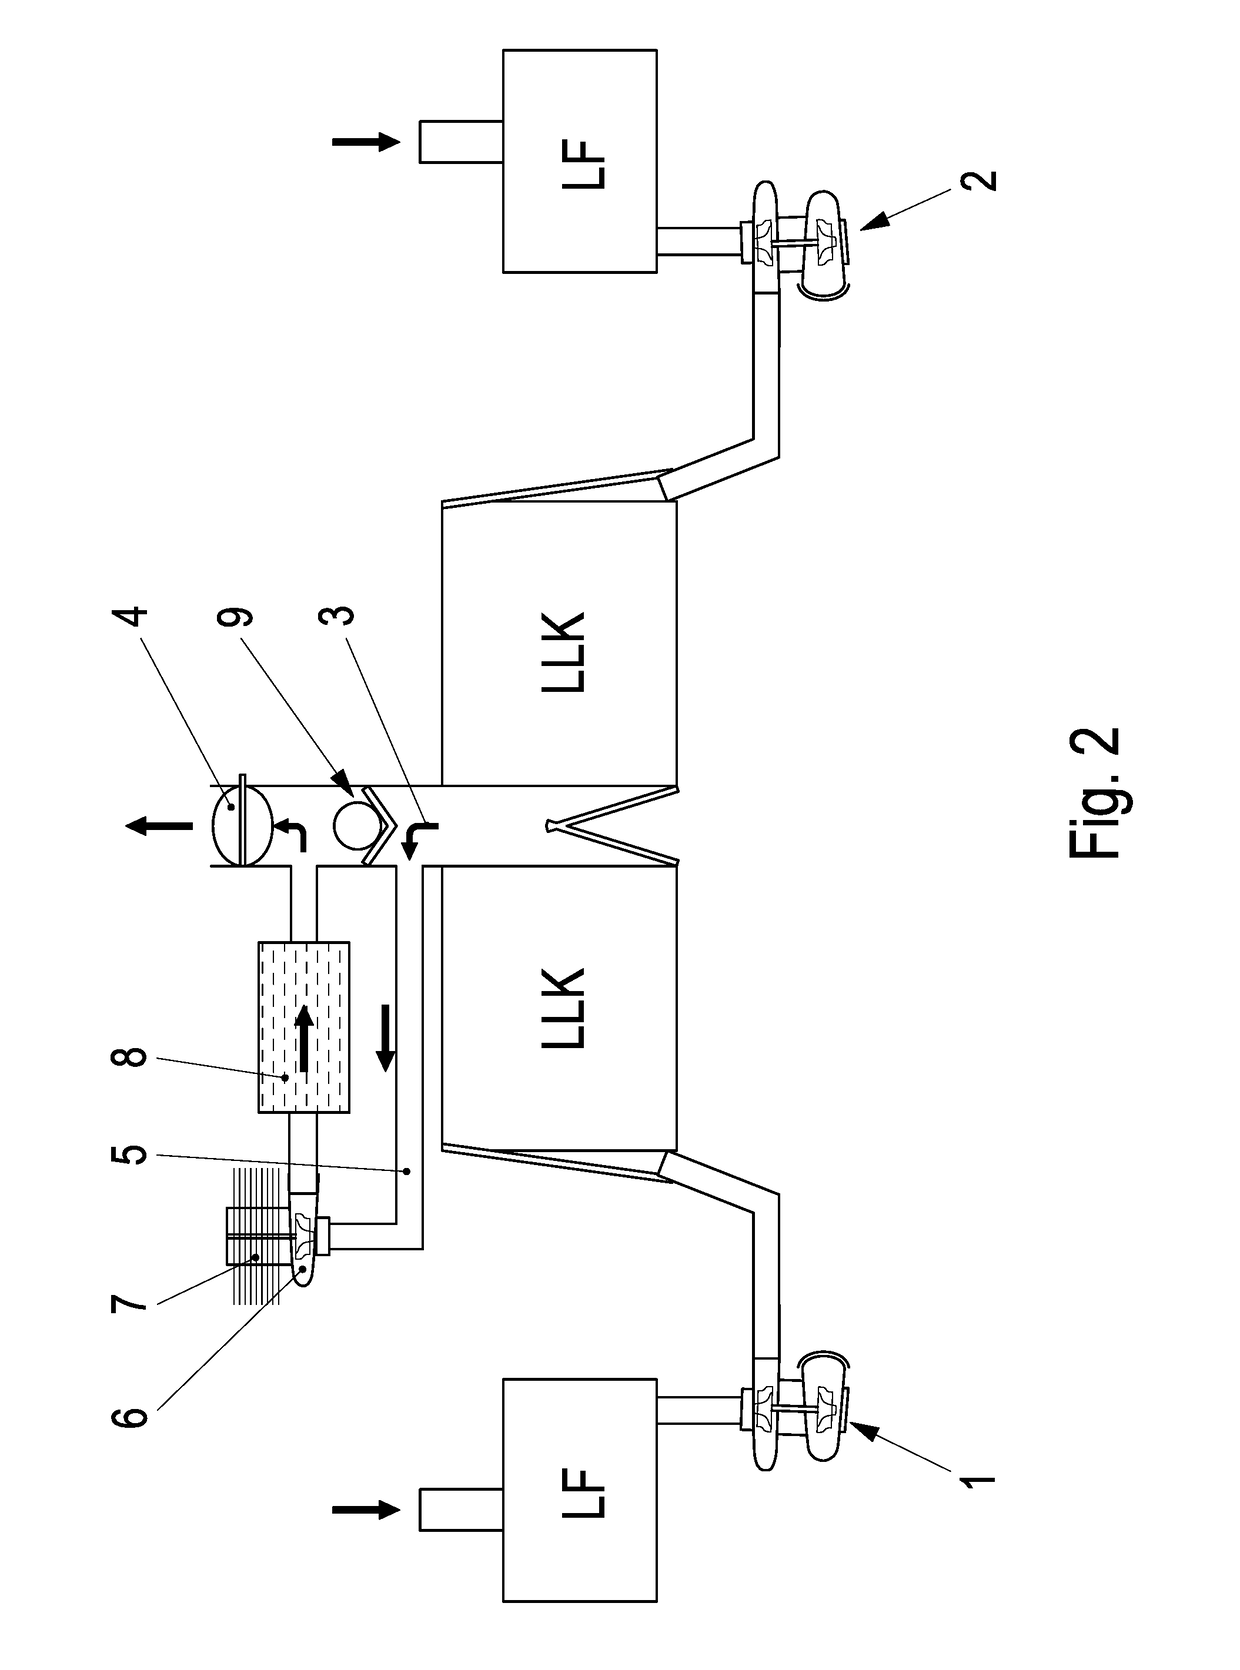 Supercharging device for an internal combustion engine